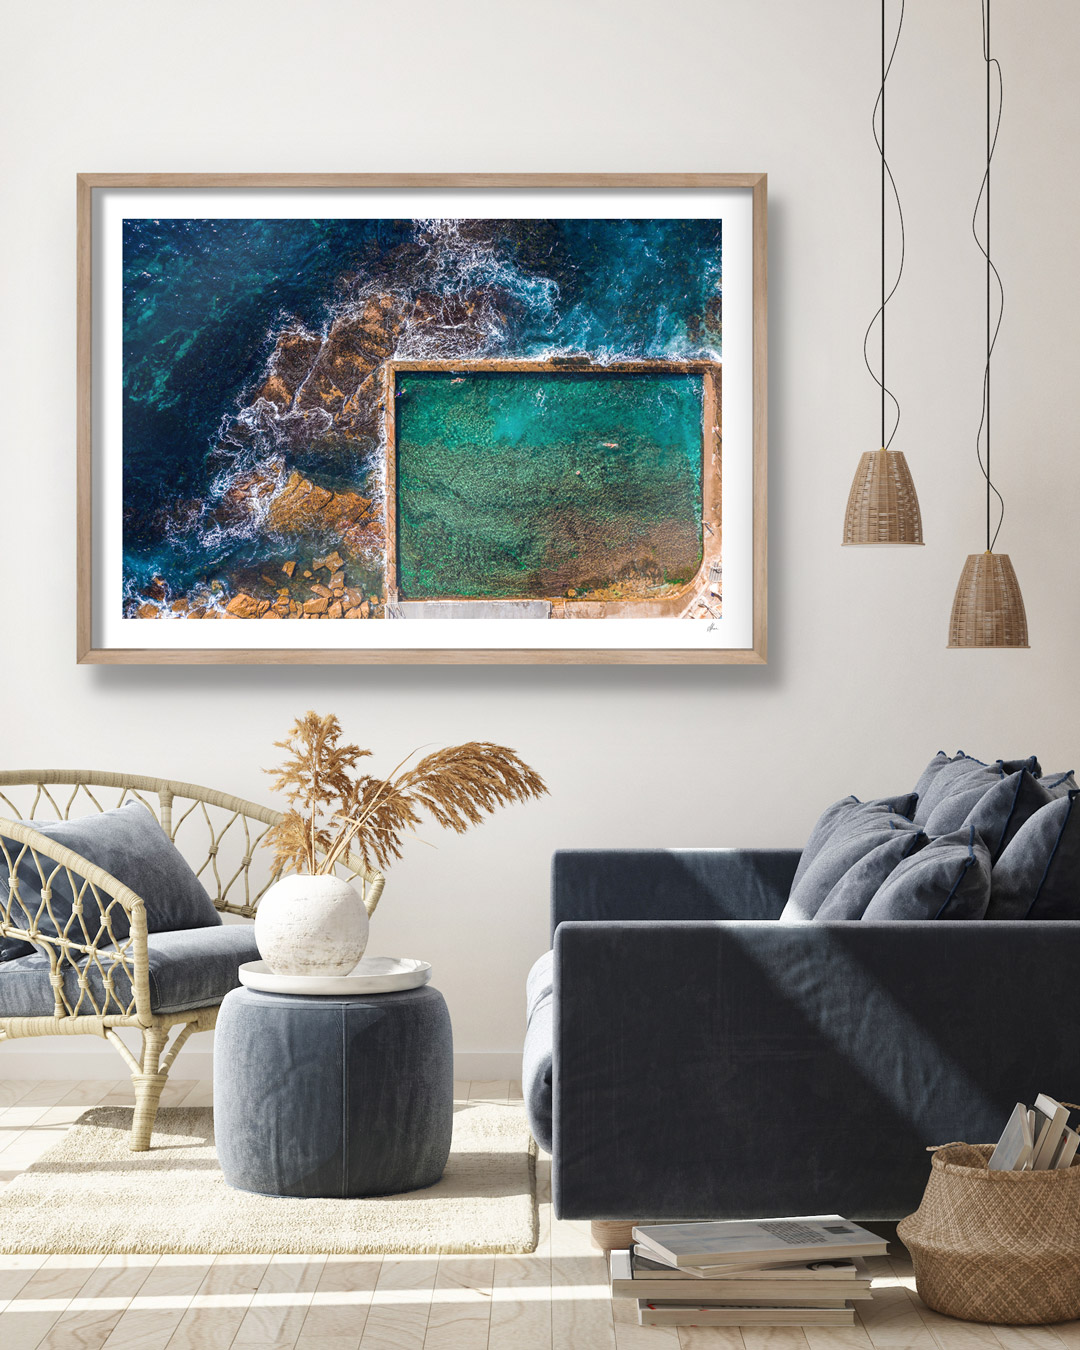 Interior design inspiration for the beachy home interior. Framed print of iconic Wylie’s Baths Coogee for the feature wall.